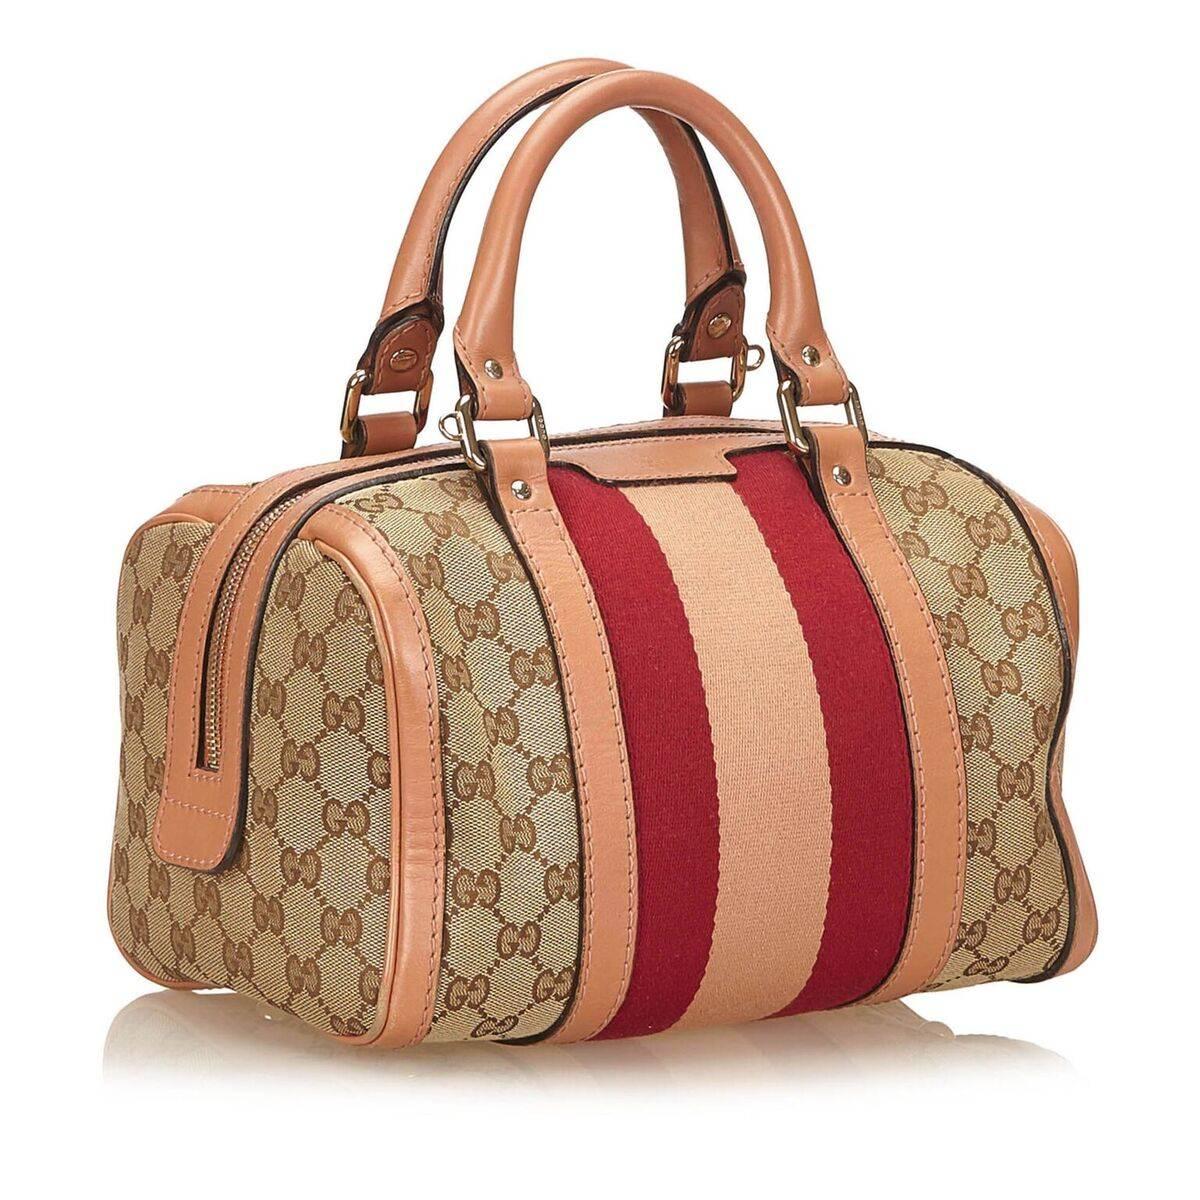 Product details:  Multicolor jacquard Guccissima satchel by Gucci.  Trimmed with leather.  Dual carry handles.  Detachable, adjustable crossbody strap.  Top zip closure.  Interior zip pocket.  Silvertone hardware.  10